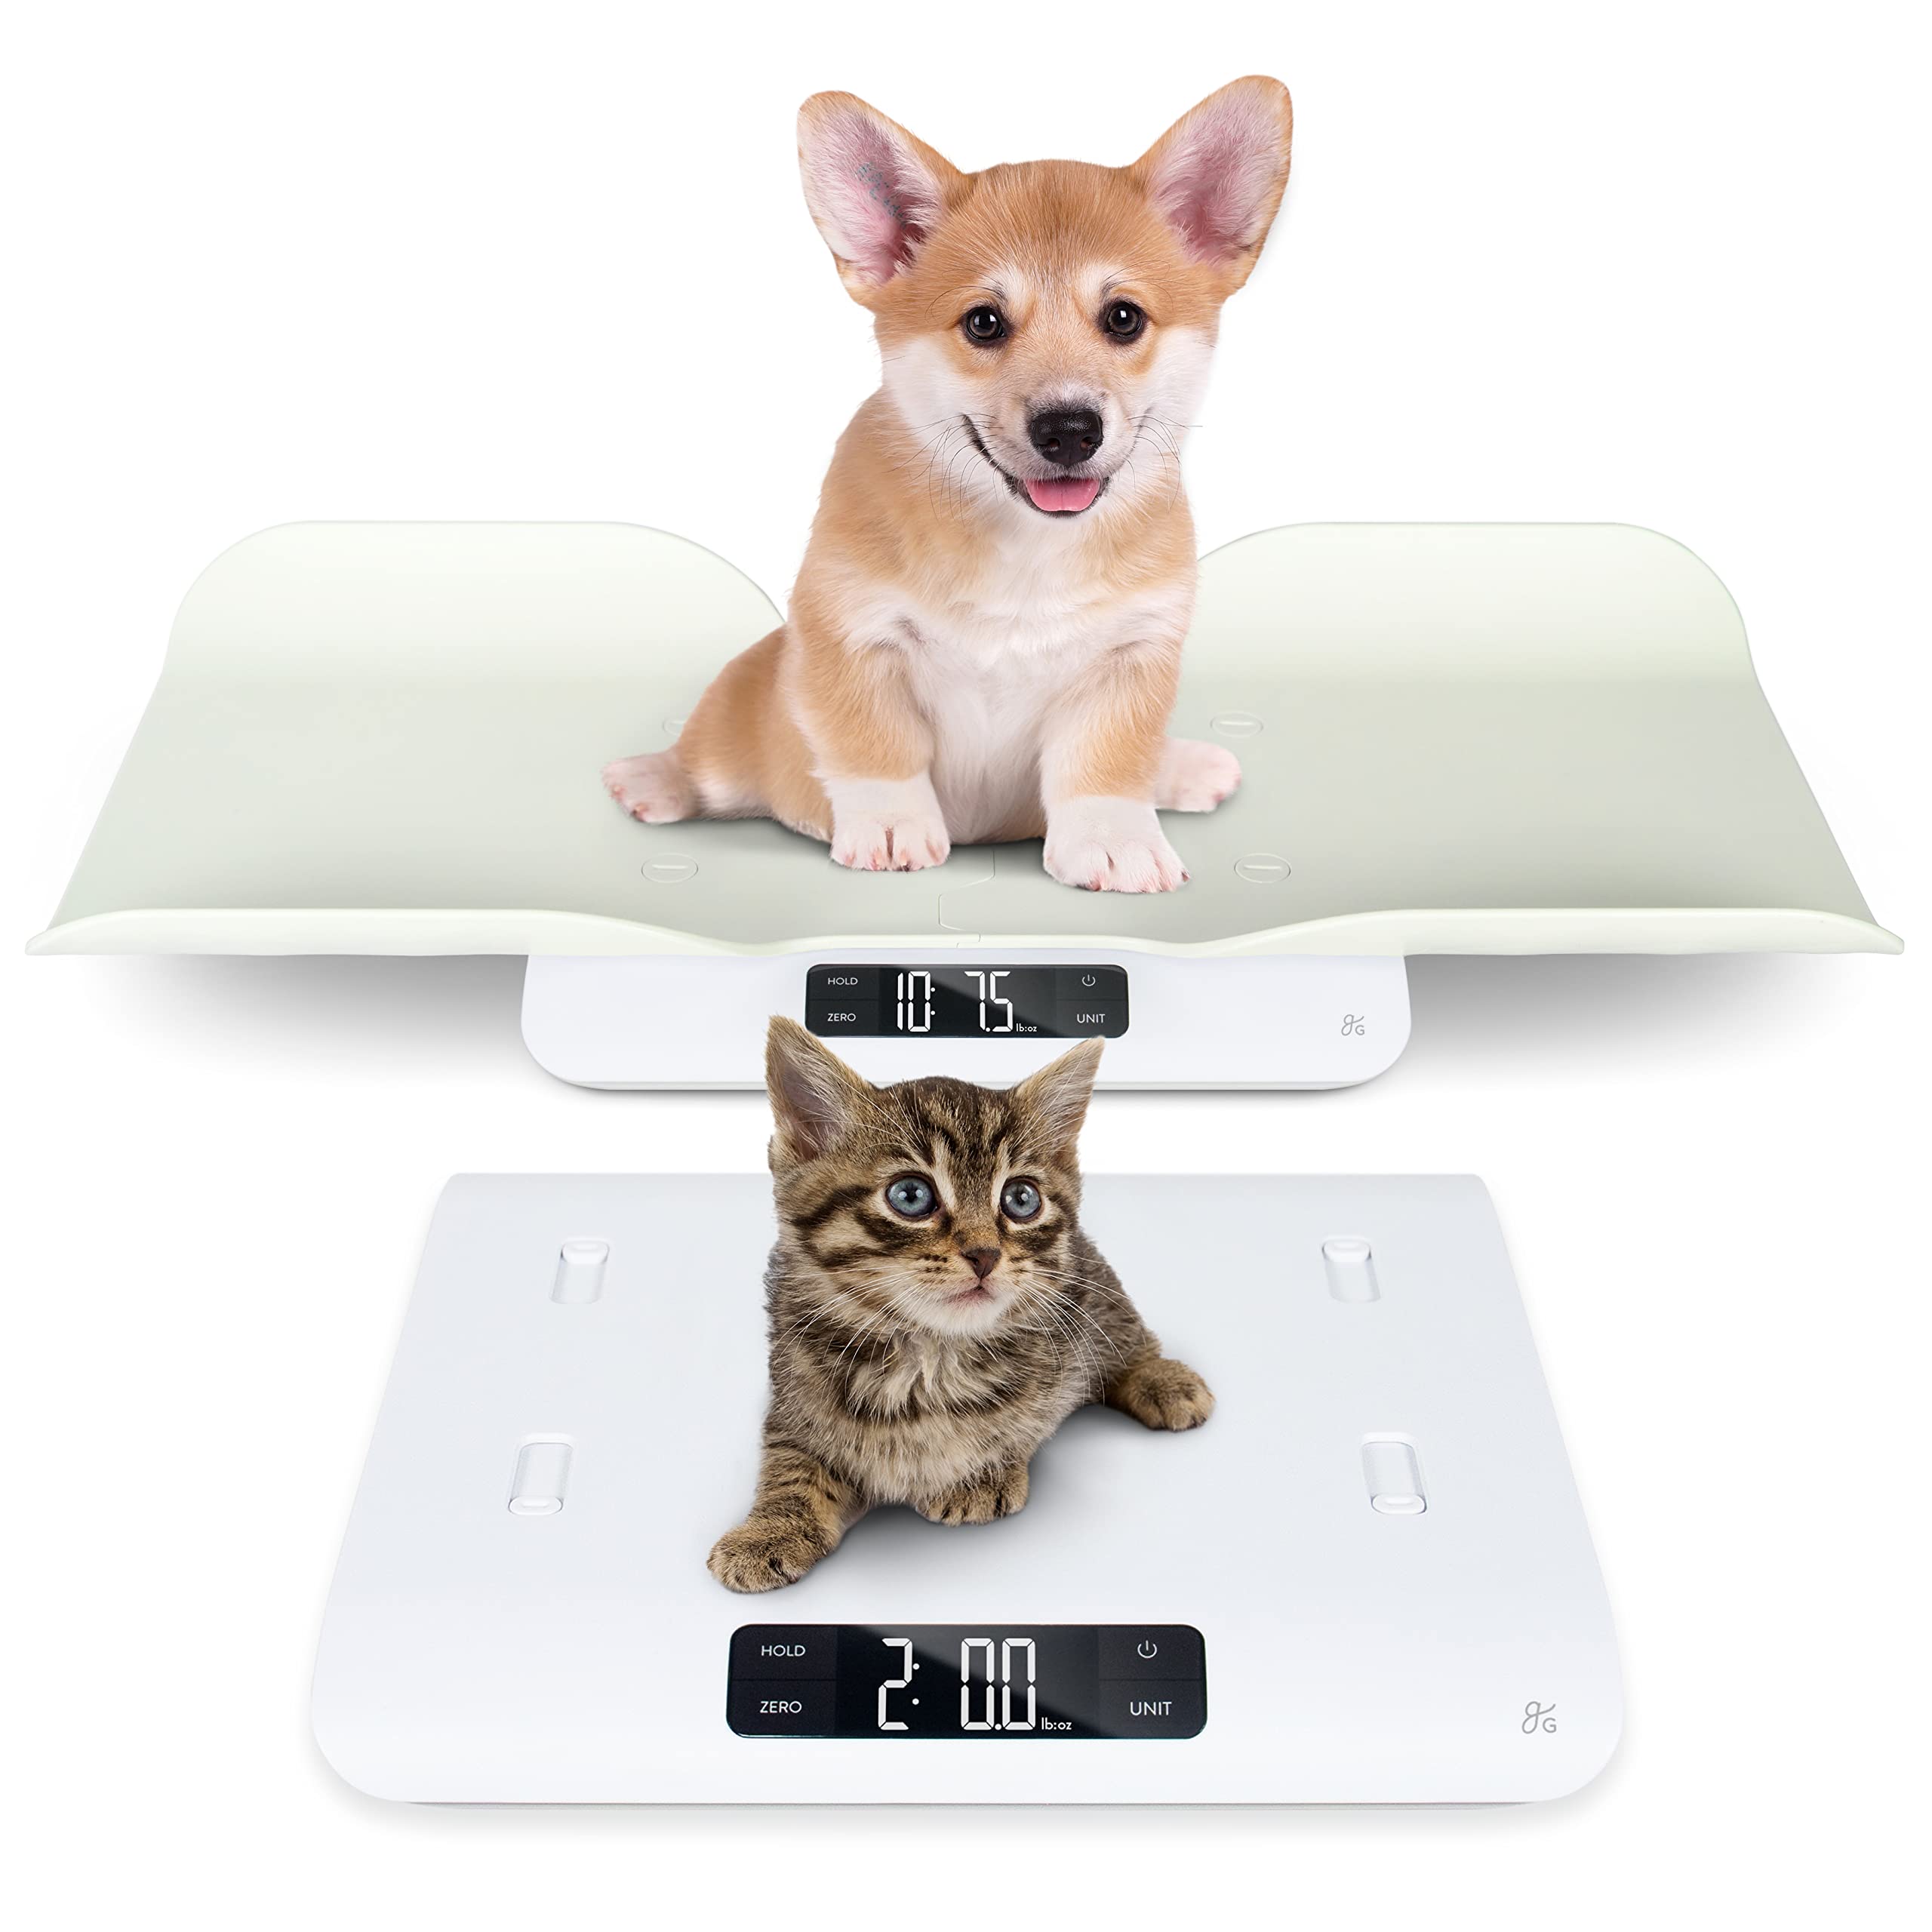 Greater Goods Digital Pet Scale - Accurately Weigh Your Kitten, Rabbit, or  Puppy, with a Wiggle-Proof Algorithm, a Great Option as a Scale for Small  Animals